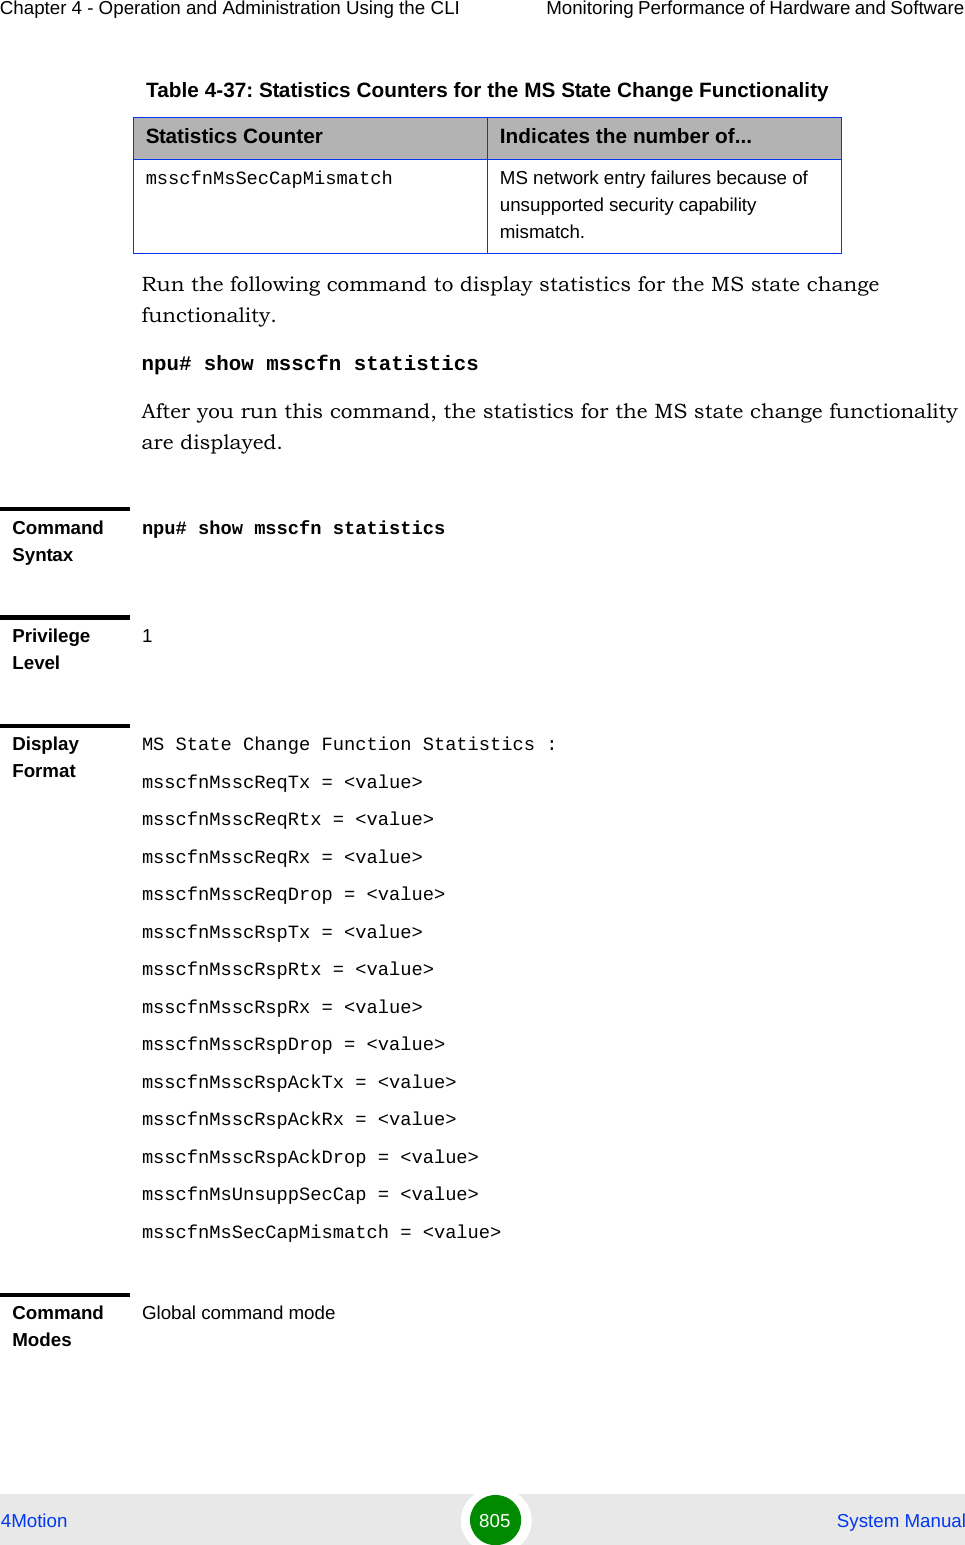 Chapter 4 - Operation and Administration Using the CLI Monitoring Performance of Hardware and Software 4Motion 805  System ManualRun the following command to display statistics for the MS state change functionality.npu# show msscfn statisticsAfter you run this command, the statistics for the MS state change functionality are displayed.msscfnMsSecCapMismatch MS network entry failures because of unsupported security capability mismatch.Command Syntaxnpu# show msscfn statisticsPrivilege Level1Display FormatMS State Change Function Statistics :msscfnMsscReqTx = &lt;value&gt;msscfnMsscReqRtx = &lt;value&gt;msscfnMsscReqRx = &lt;value&gt;msscfnMsscReqDrop = &lt;value&gt;msscfnMsscRspTx = &lt;value&gt;msscfnMsscRspRtx = &lt;value&gt;msscfnMsscRspRx = &lt;value&gt;msscfnMsscRspDrop = &lt;value&gt;msscfnMsscRspAckTx = &lt;value&gt;msscfnMsscRspAckRx = &lt;value&gt;msscfnMsscRspAckDrop = &lt;value&gt;msscfnMsUnsuppSecCap = &lt;value&gt;msscfnMsSecCapMismatch = &lt;value&gt; Command ModesGlobal command modeTable 4-37: Statistics Counters for the MS State Change FunctionalityStatistics Counter Indicates the number of...